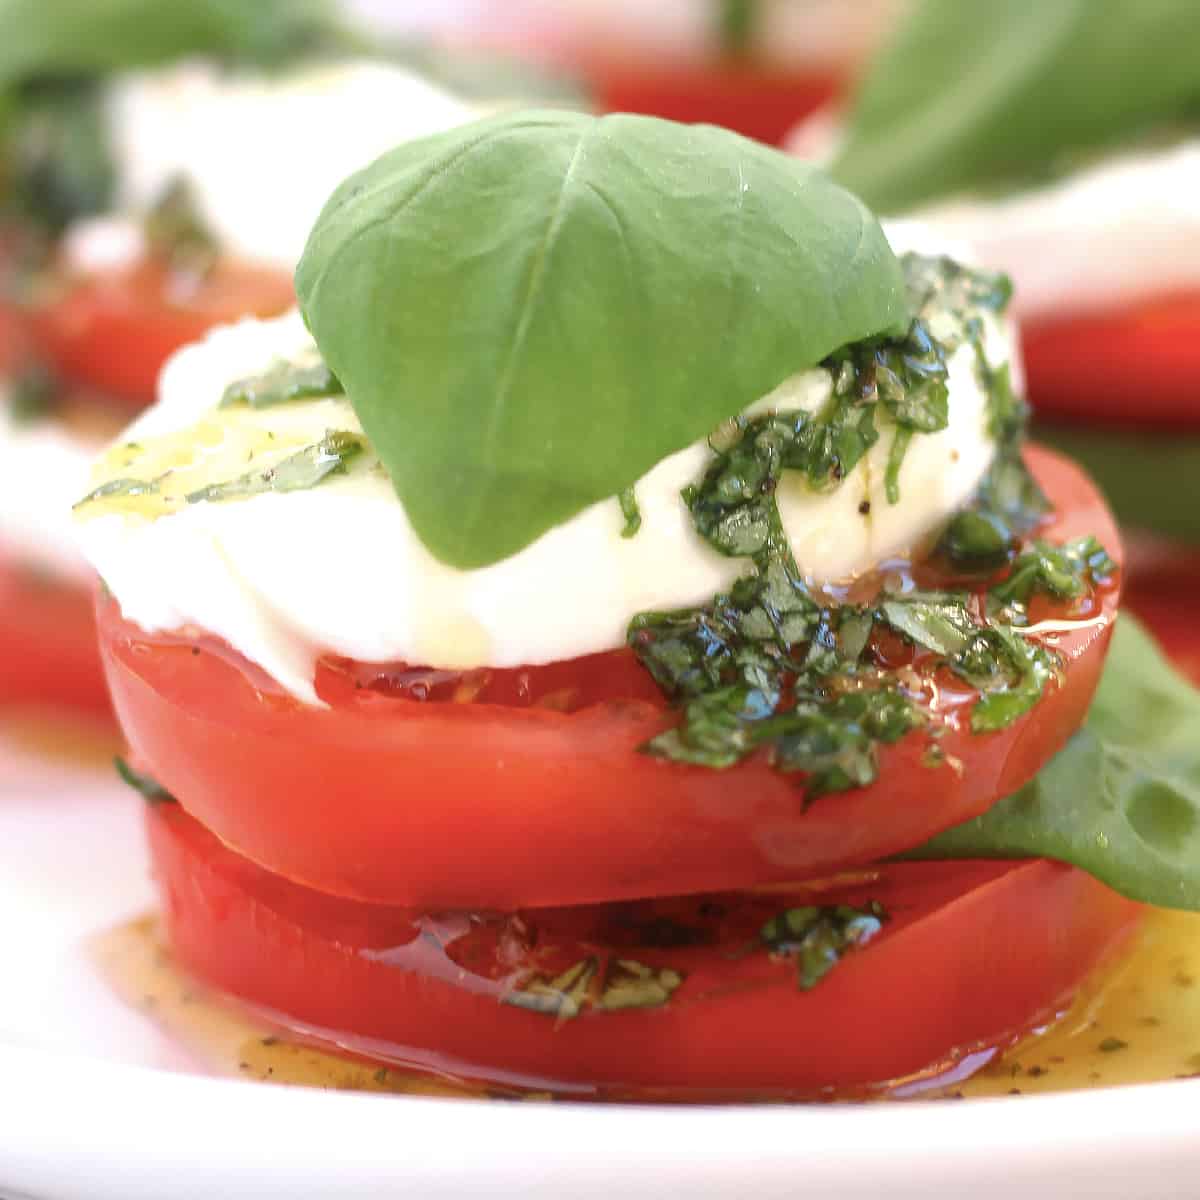 Slices of tomato, basil and mozzarella stacked on top of each other.